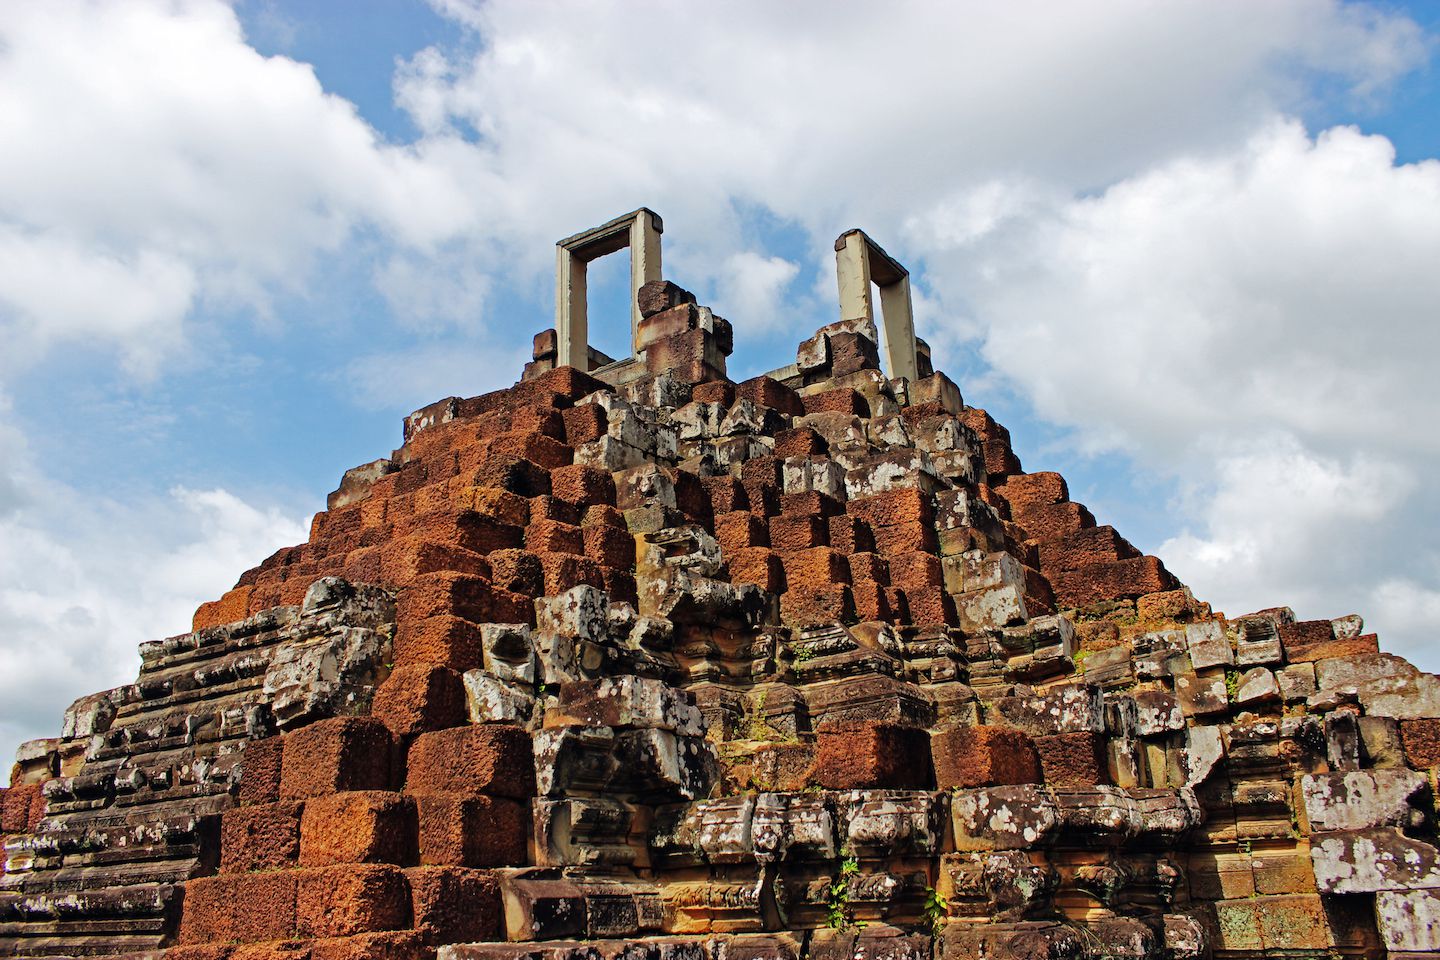 Main tower of Baphuon in Angkor Thom